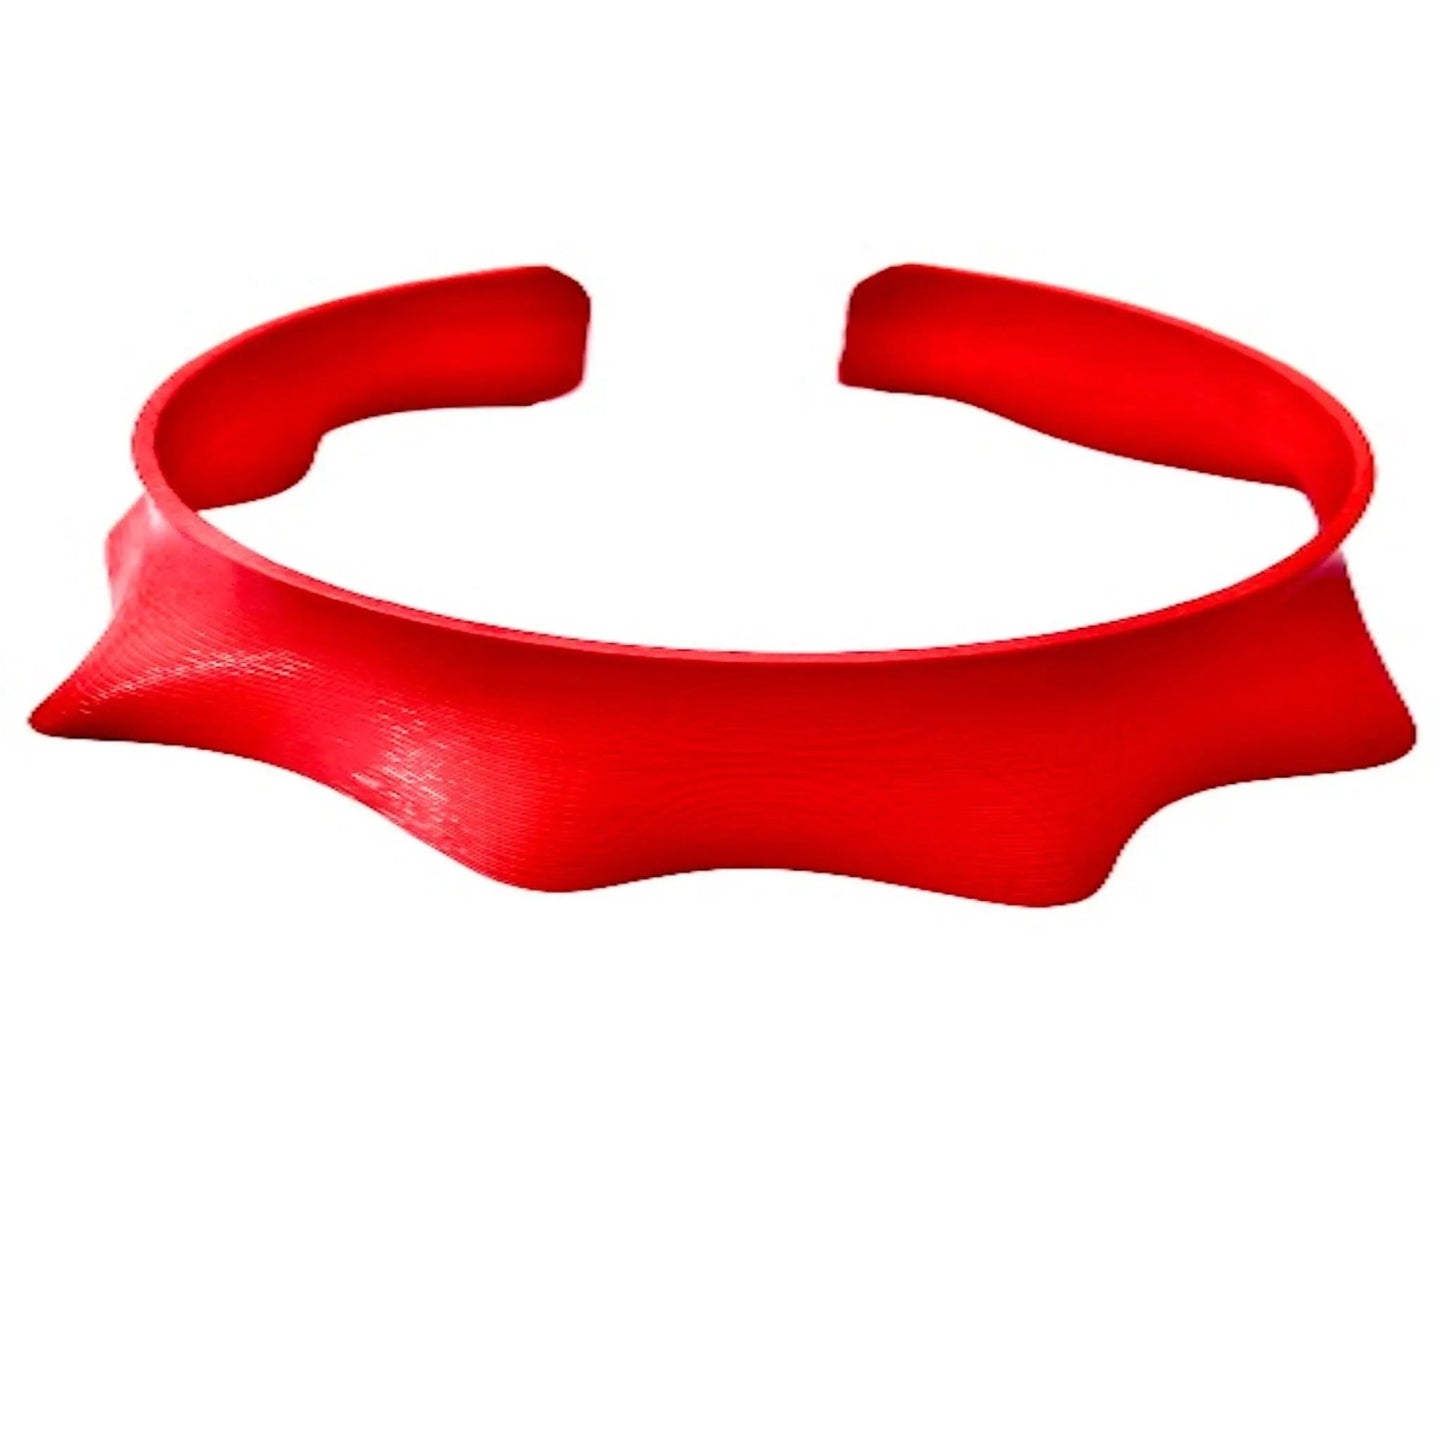 3D Printed Necklace & Headband in Red LOVE HERO SUSTAINABLE FASHION